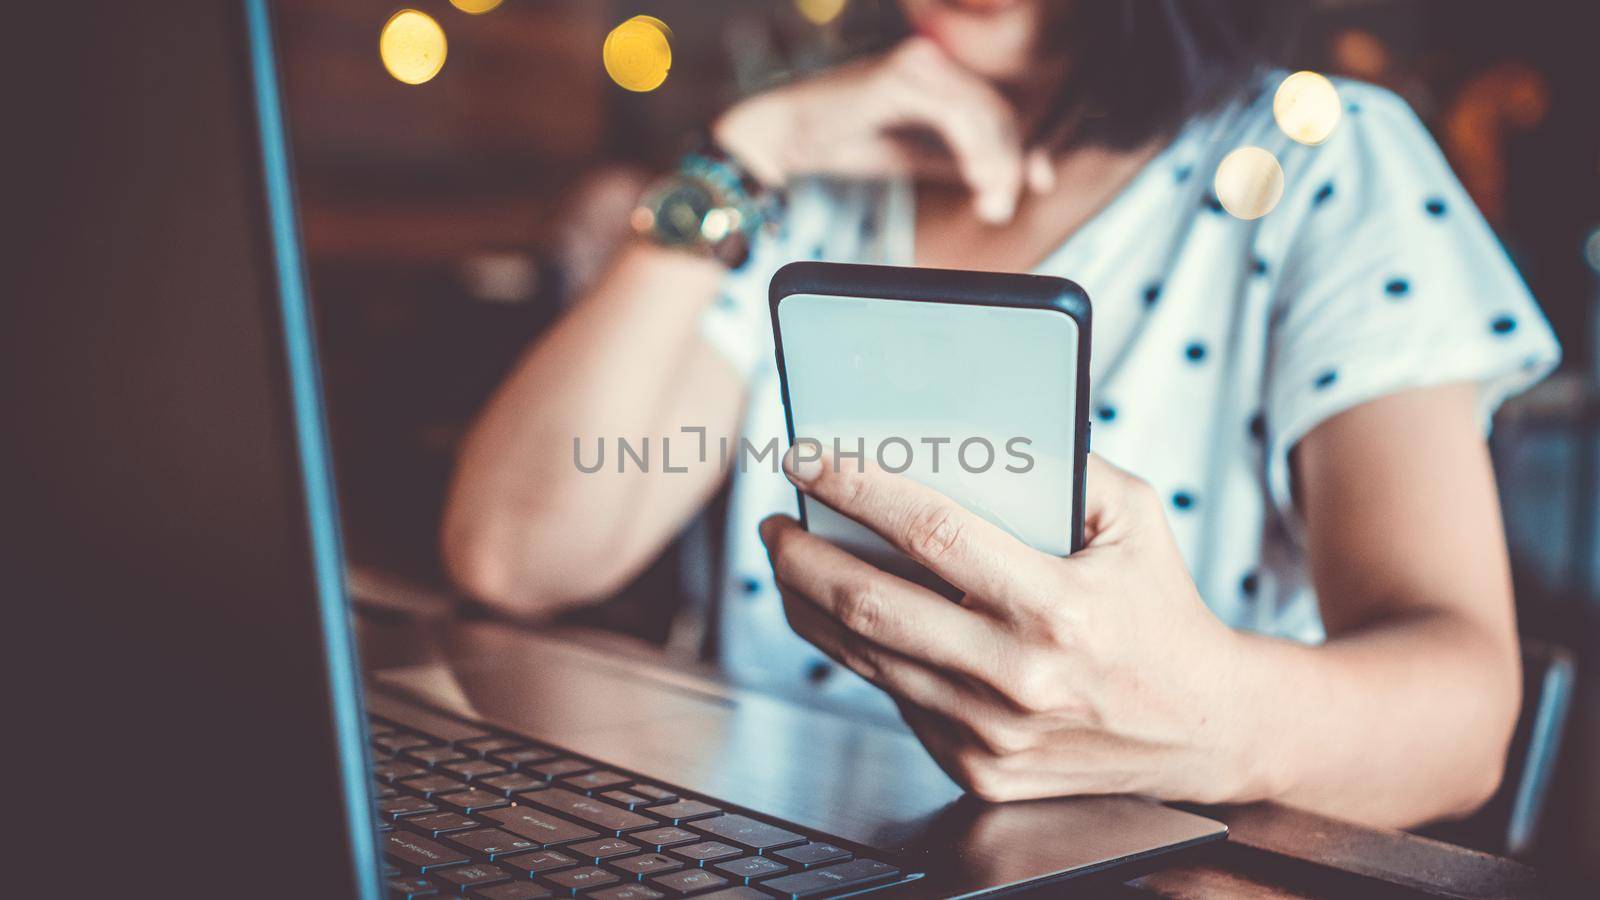  Woman use technology devices smartphone and laptop to work or study do connect communication business concept
